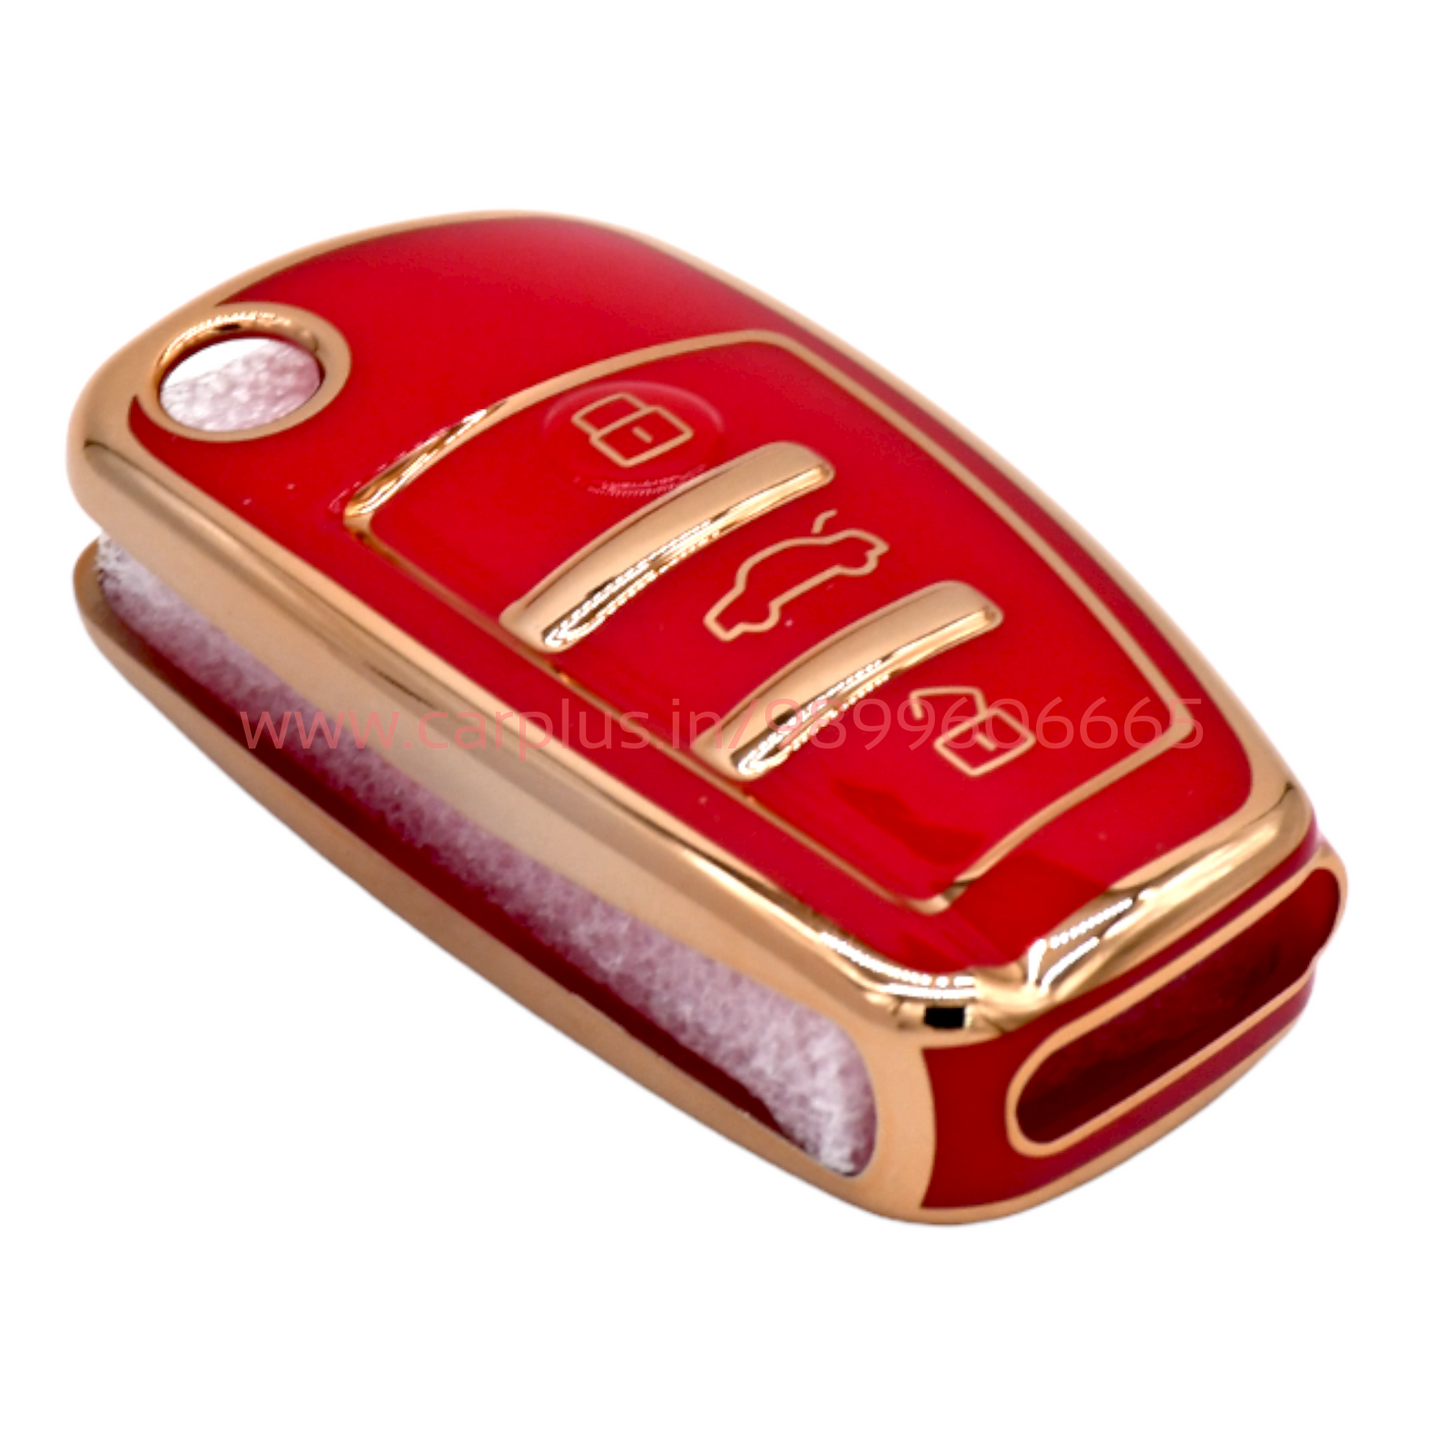 
                  
                    KMH TPU Gold Car Key Cover Compatible with Audi A1 A3 A6 Q2 Q3 Q7 TT TTS R8 S3 S6 RS3 Smart Folding Key Cover-TPU GOLD KEY COVER-KMH-KEY COVER-Red-CARPLUS
                  
                